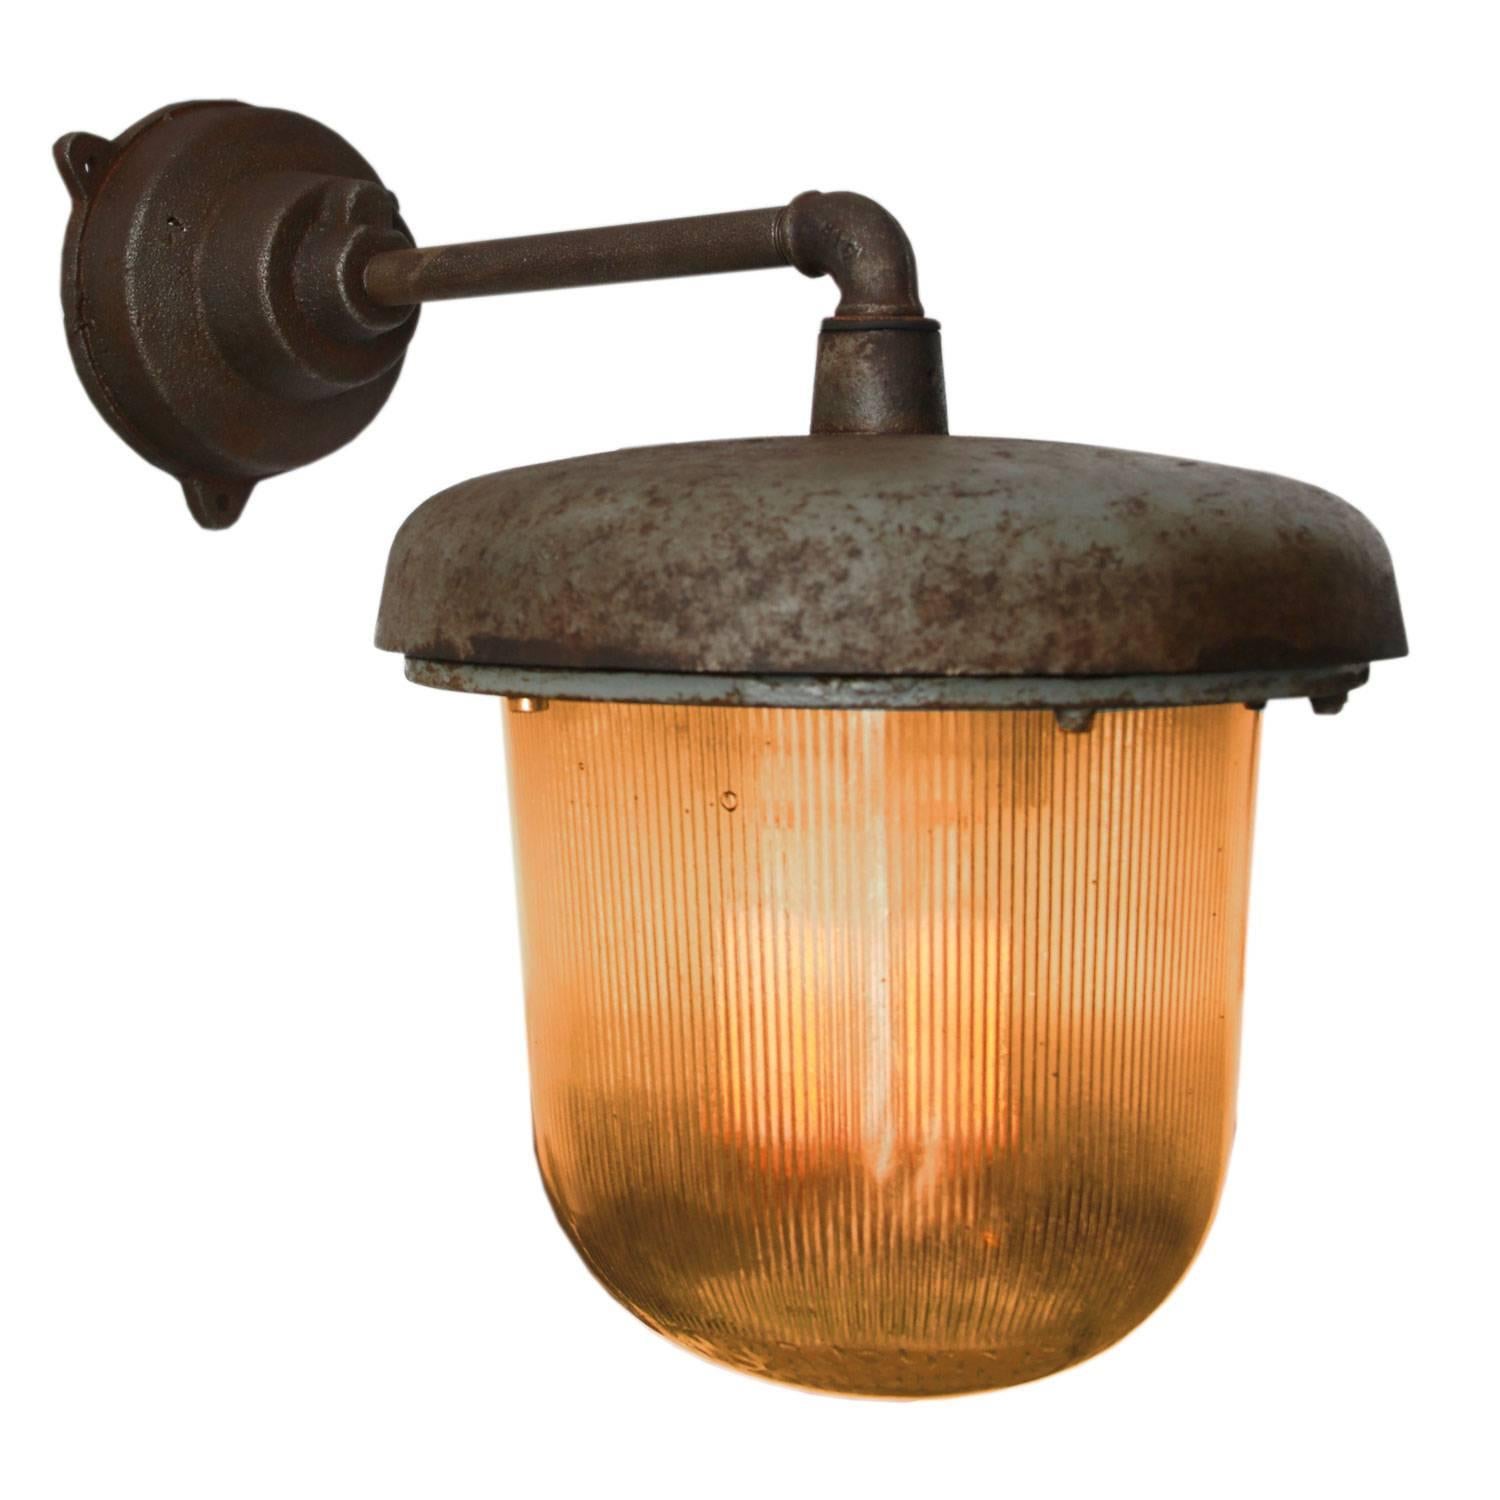 Cast iron Industrial wall light. Holophane glass. Diameter cast iron wall piece: 12 cm, 3 holes to secure. Maximum 150W E27.

Weight: 8.5 kg / 18.7 lb

All lamps have been made suitable by international standards for incandescent light bulbs,